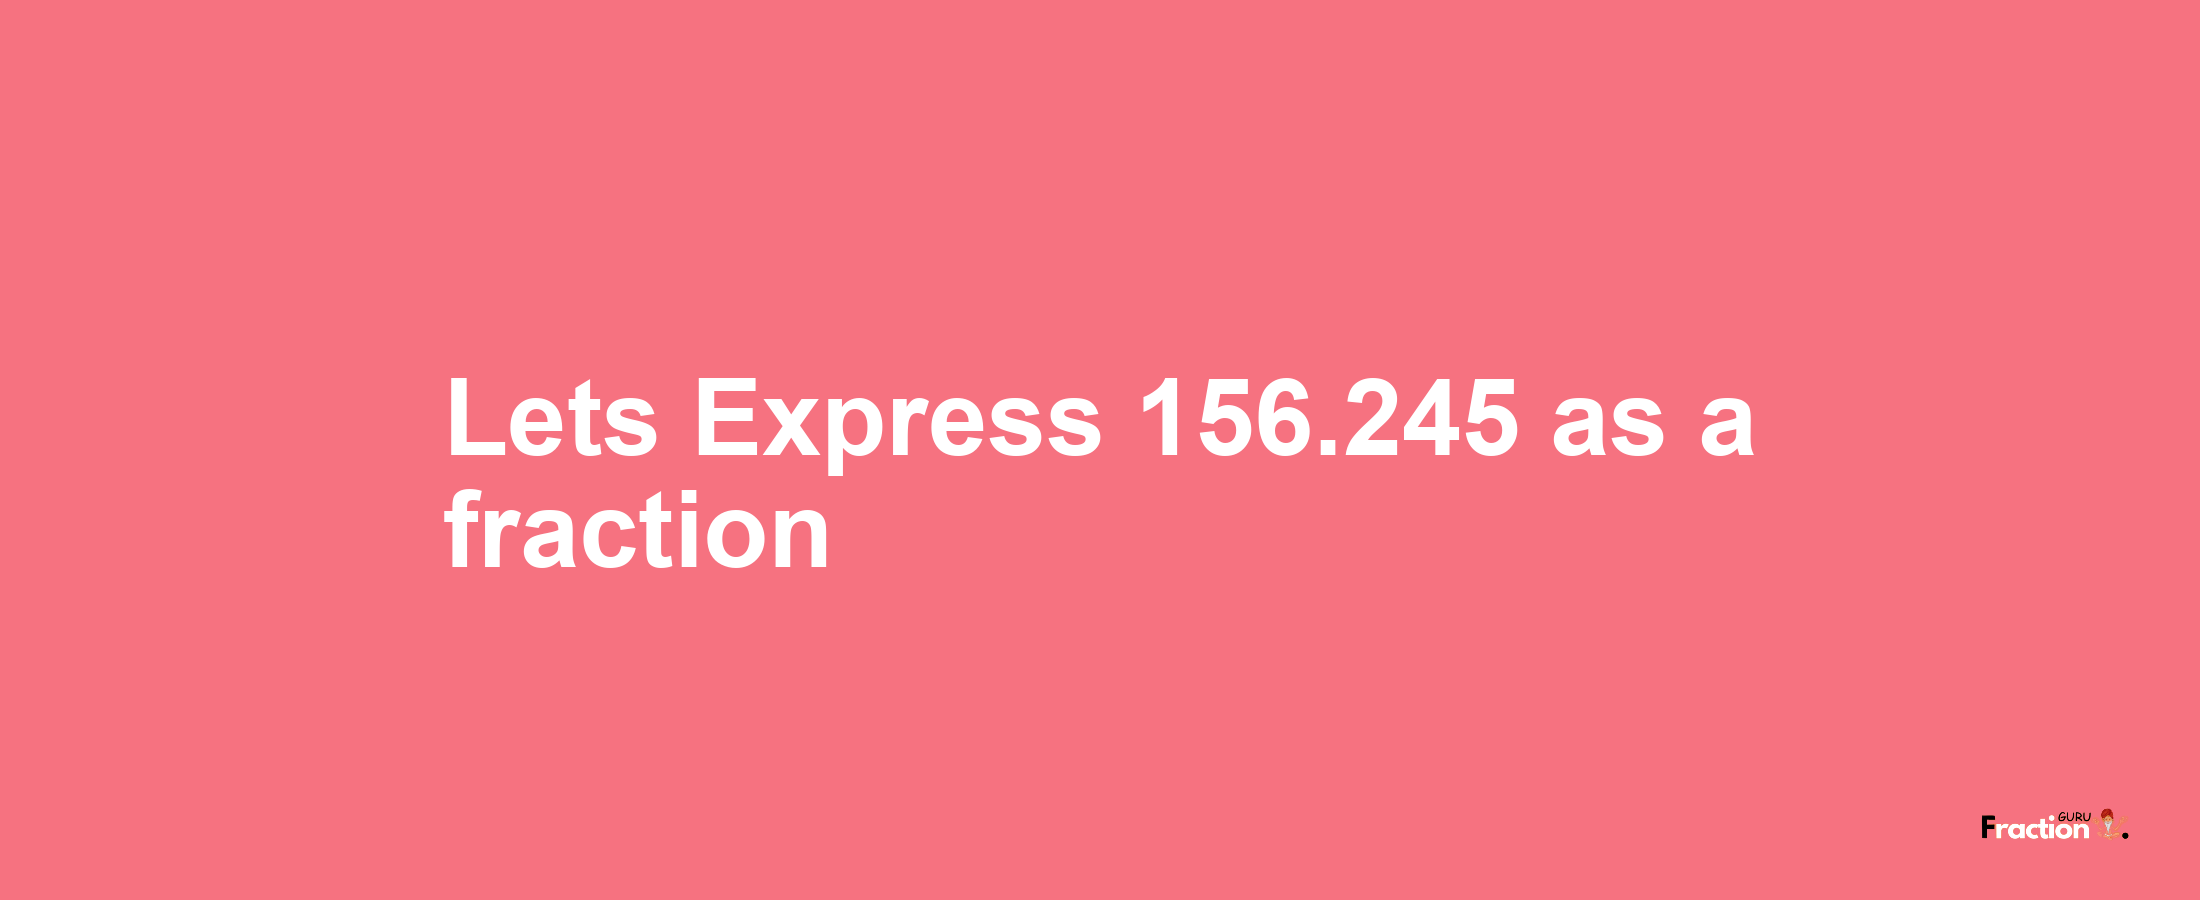 Lets Express 156.245 as afraction